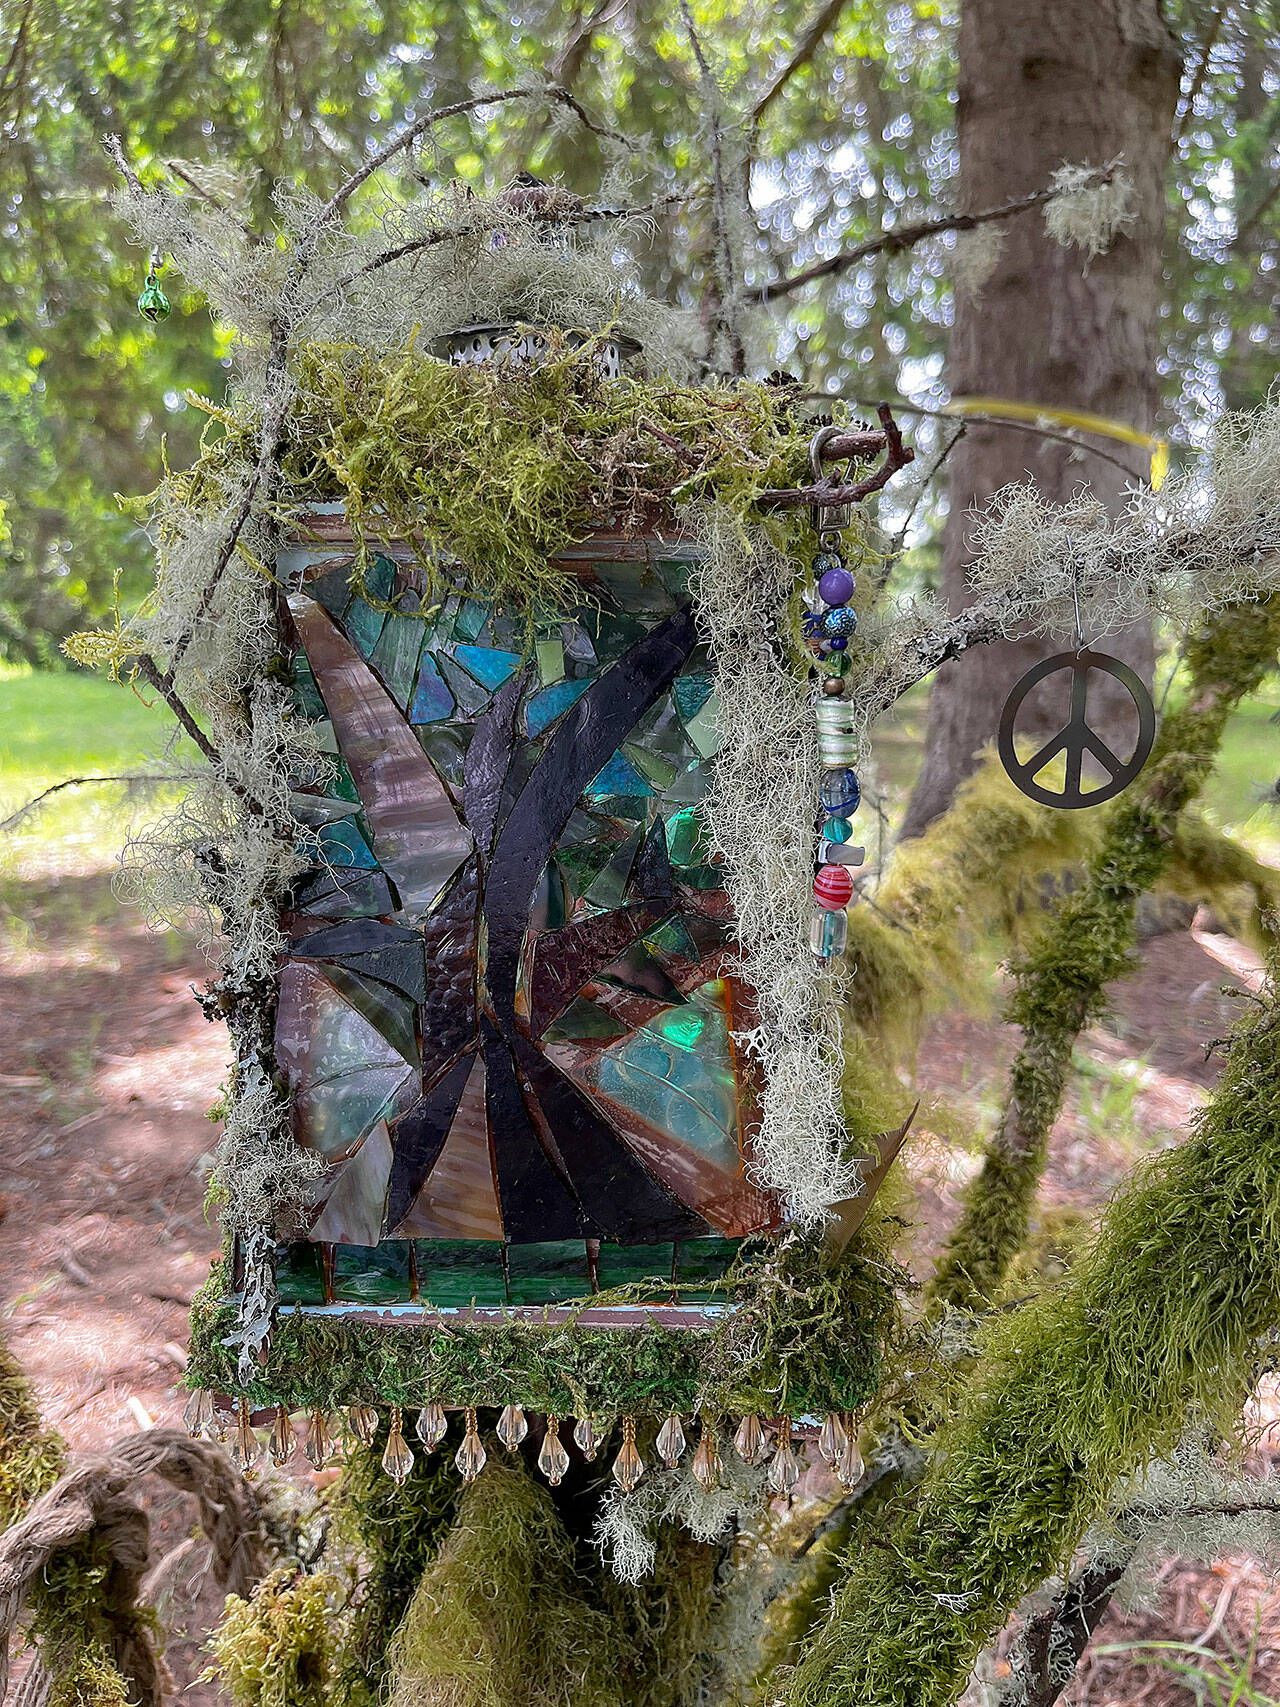 (Courtesy Photo) Islanders can find this tiny fairy house and others, tucked among the trees in the Douglas fir grove at Open Space for Arts & Community.